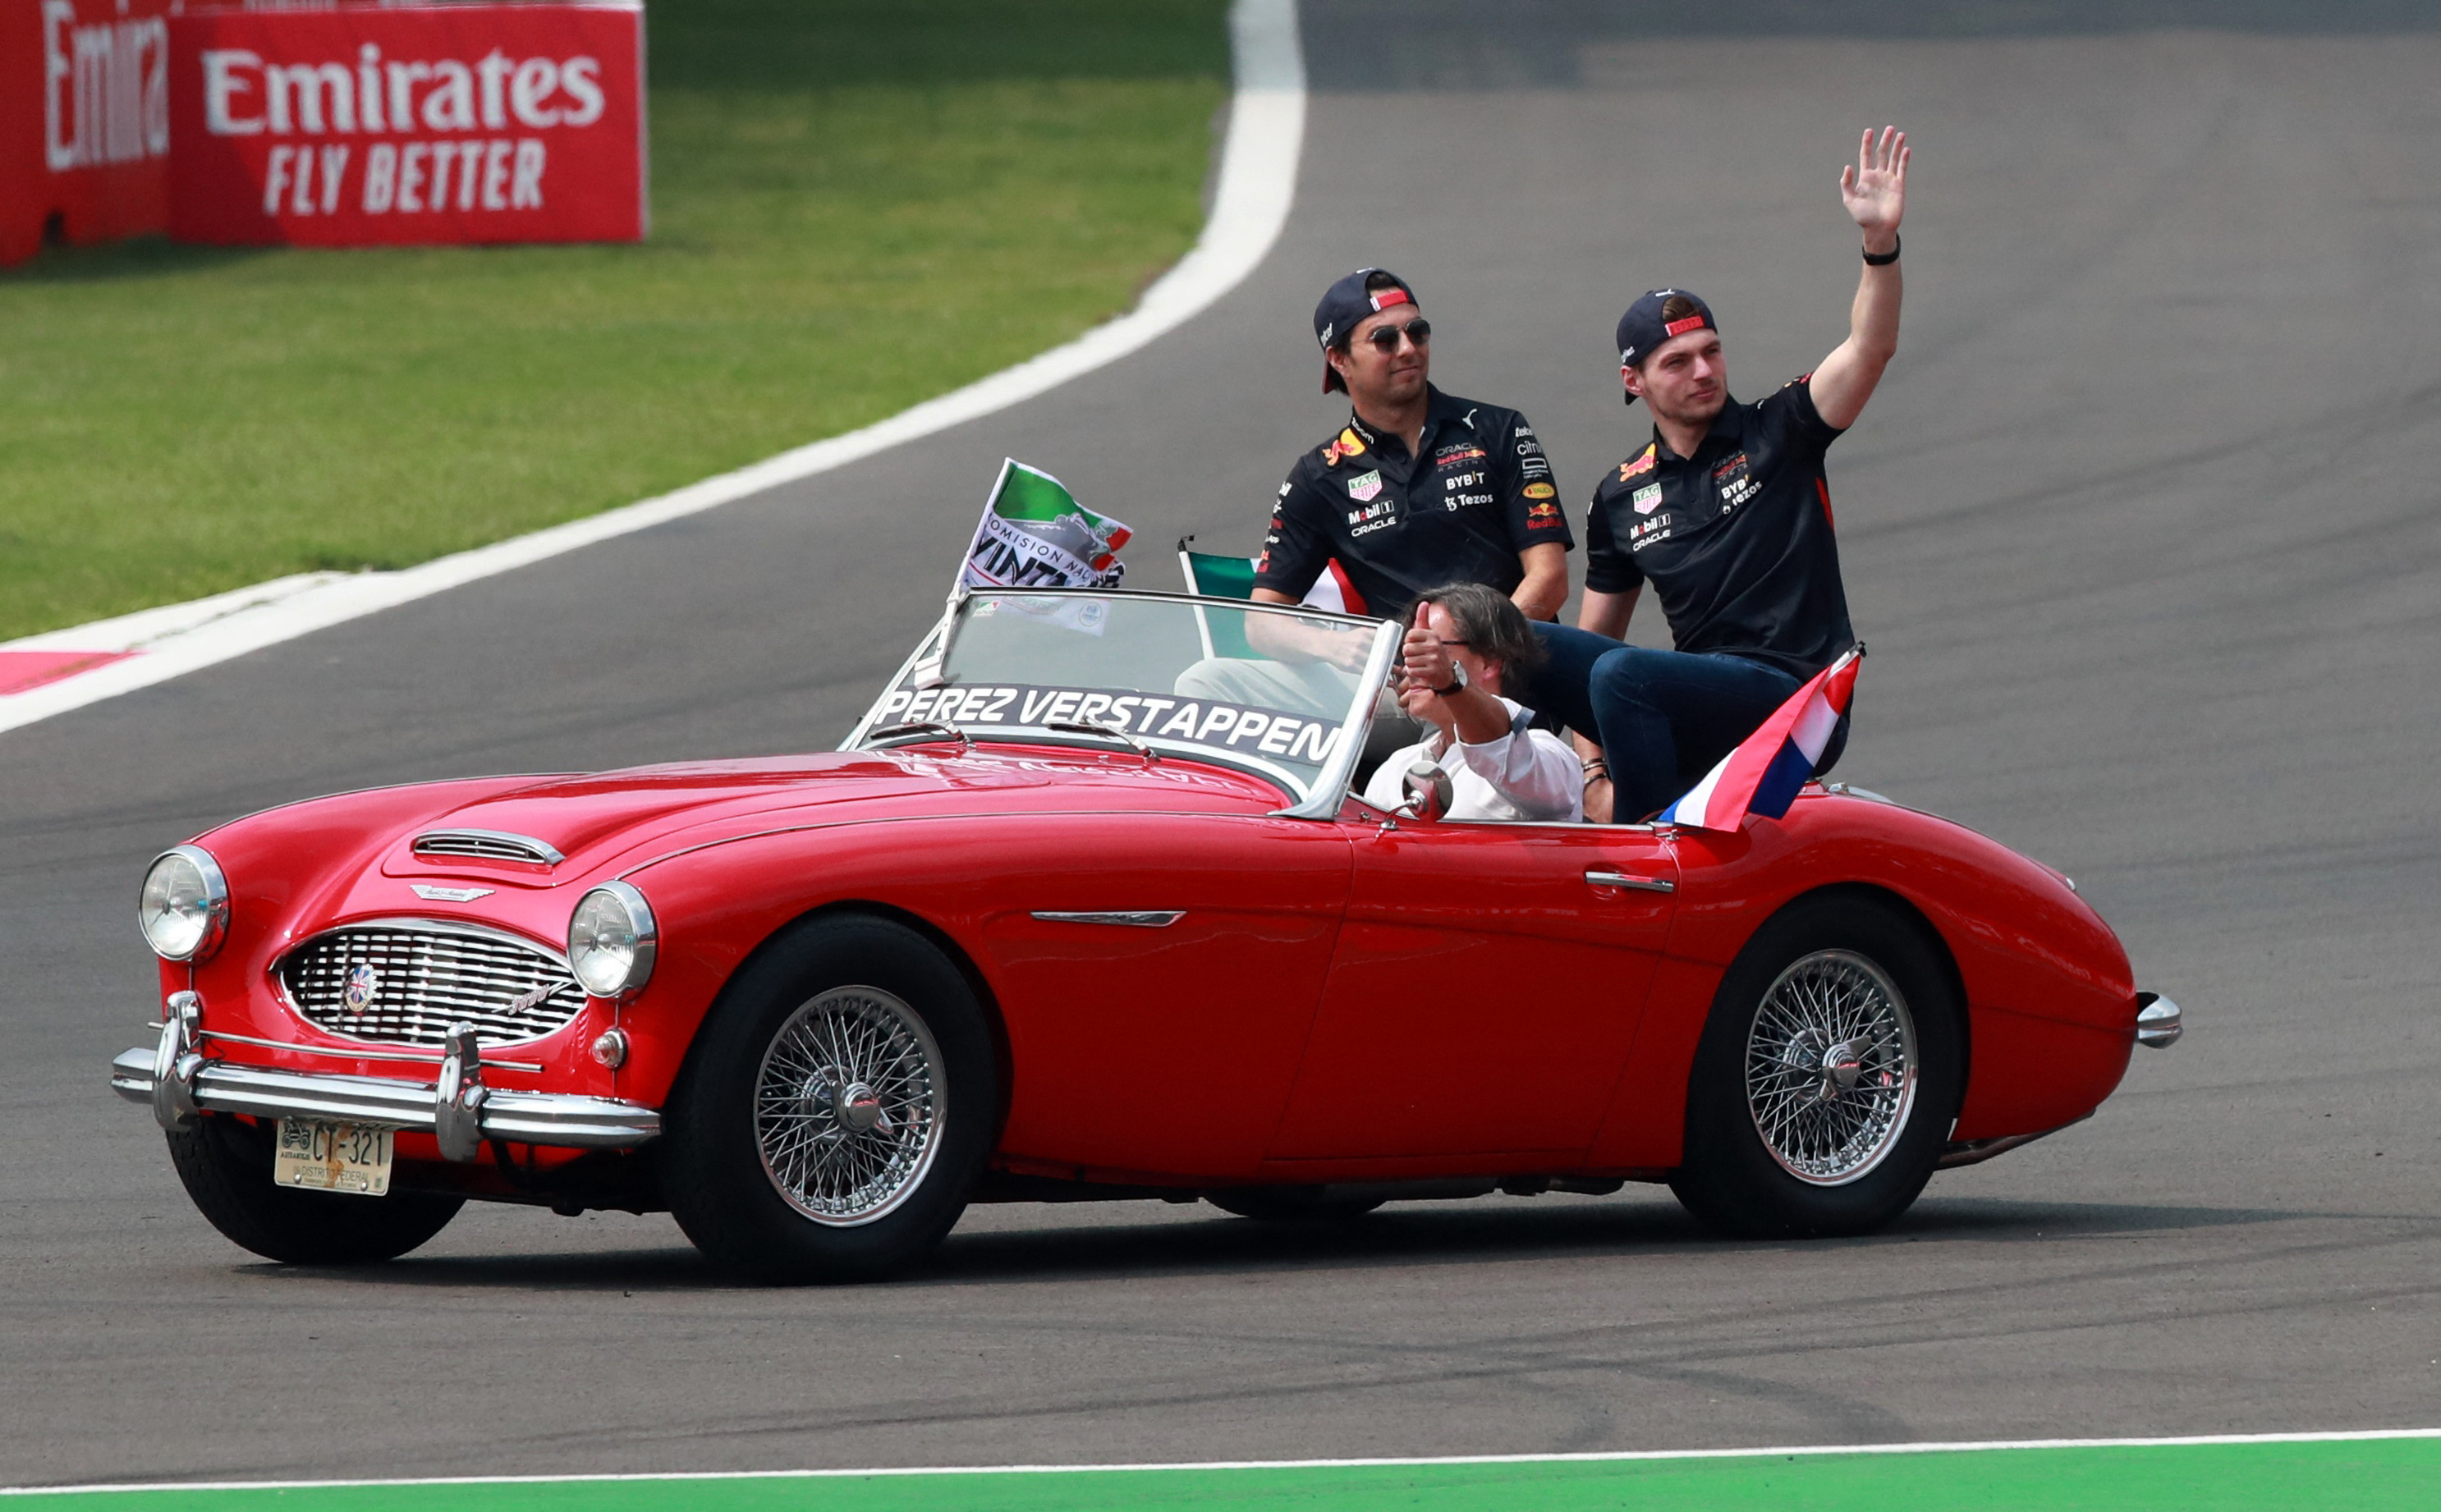 Checo Pérez and Max Verstappen were applauded by the public at the Mexican GP (Photo: REUTERS/Henry Romero)